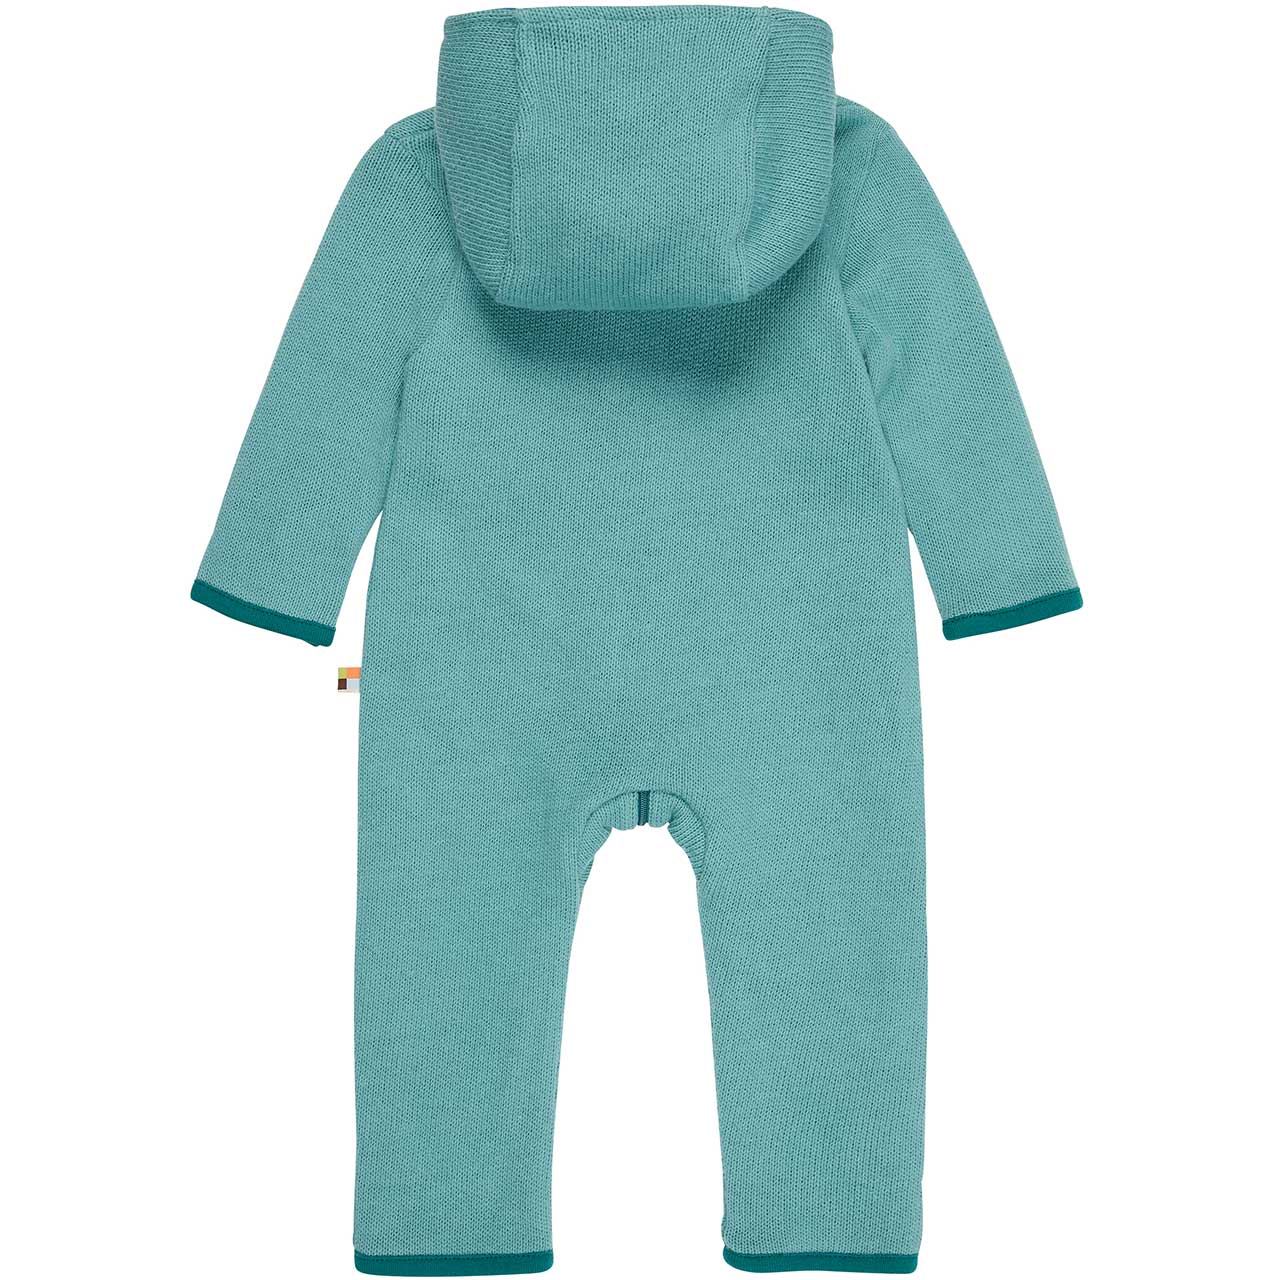 loud proud Unisex Baby Wendeoverall Strick Strampler